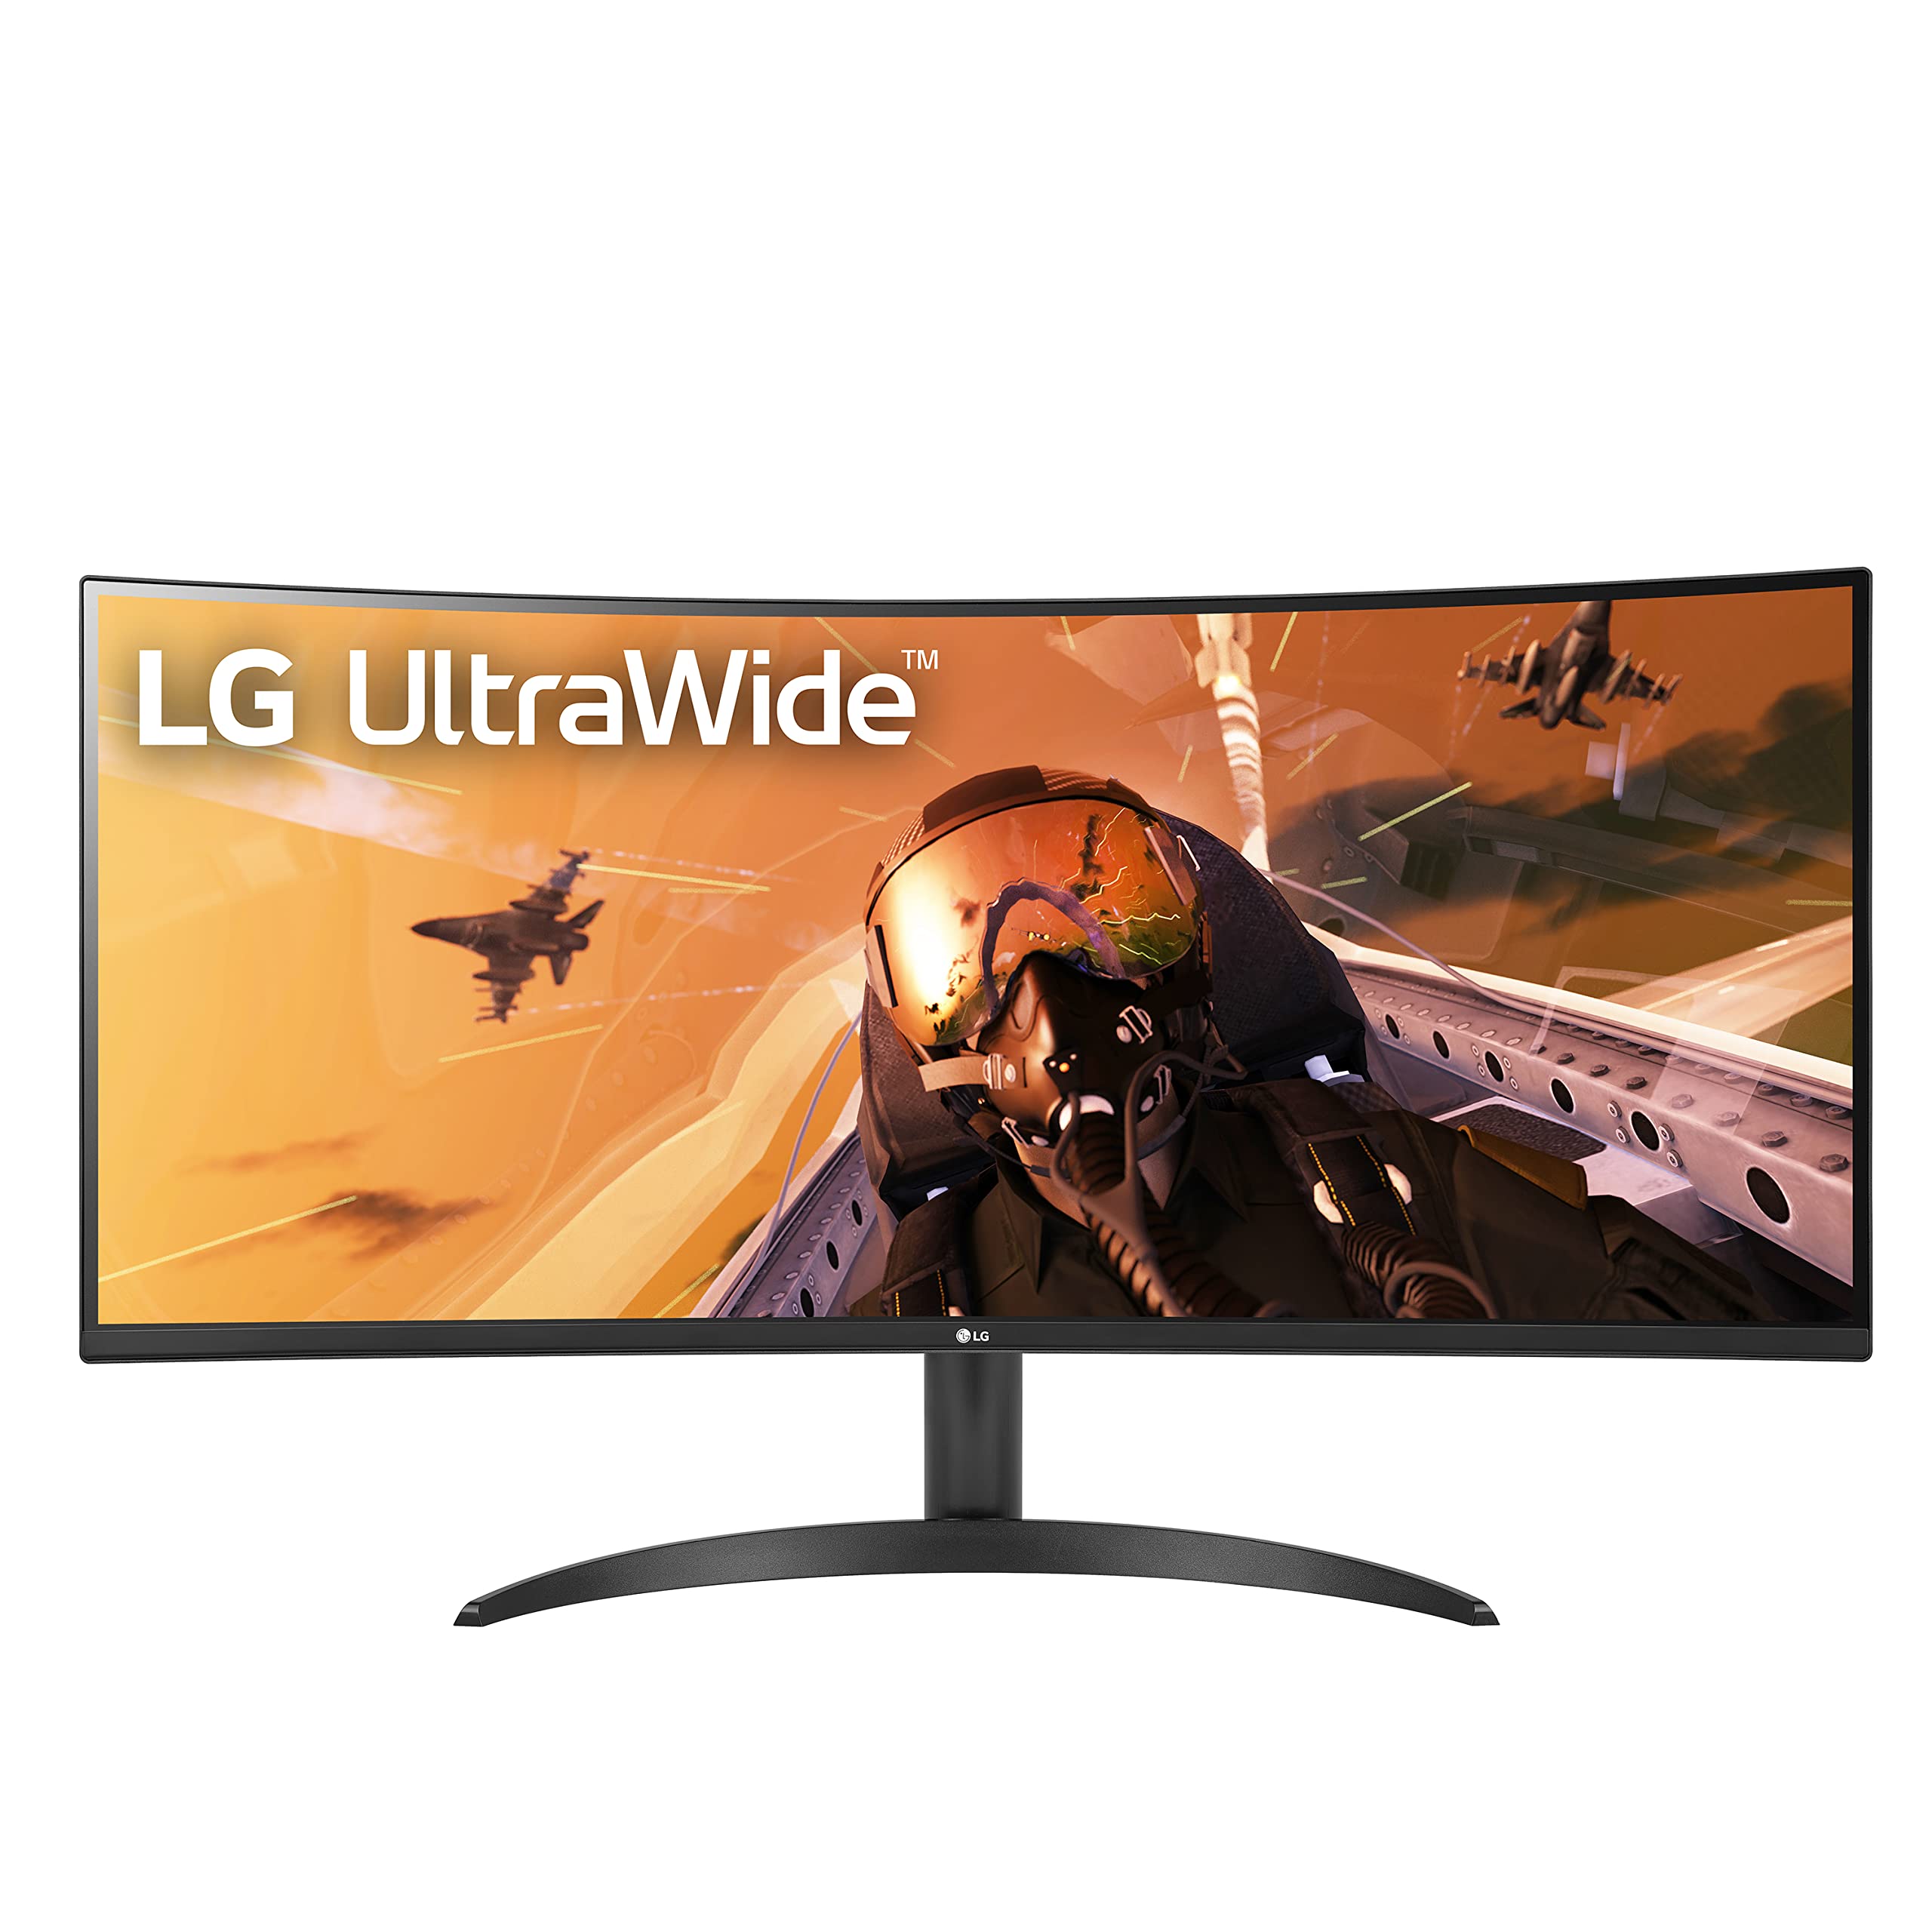 LG 34WP60C-B 34-Inch 21:9 Curved UltraWide QHD (3440x1440) VA Display with sRGB 99% Color Gamut and HDR 10, AMD FreeSync Premium and 3-Side Virtually Borderless Screen Curved QHD Tilt,Black